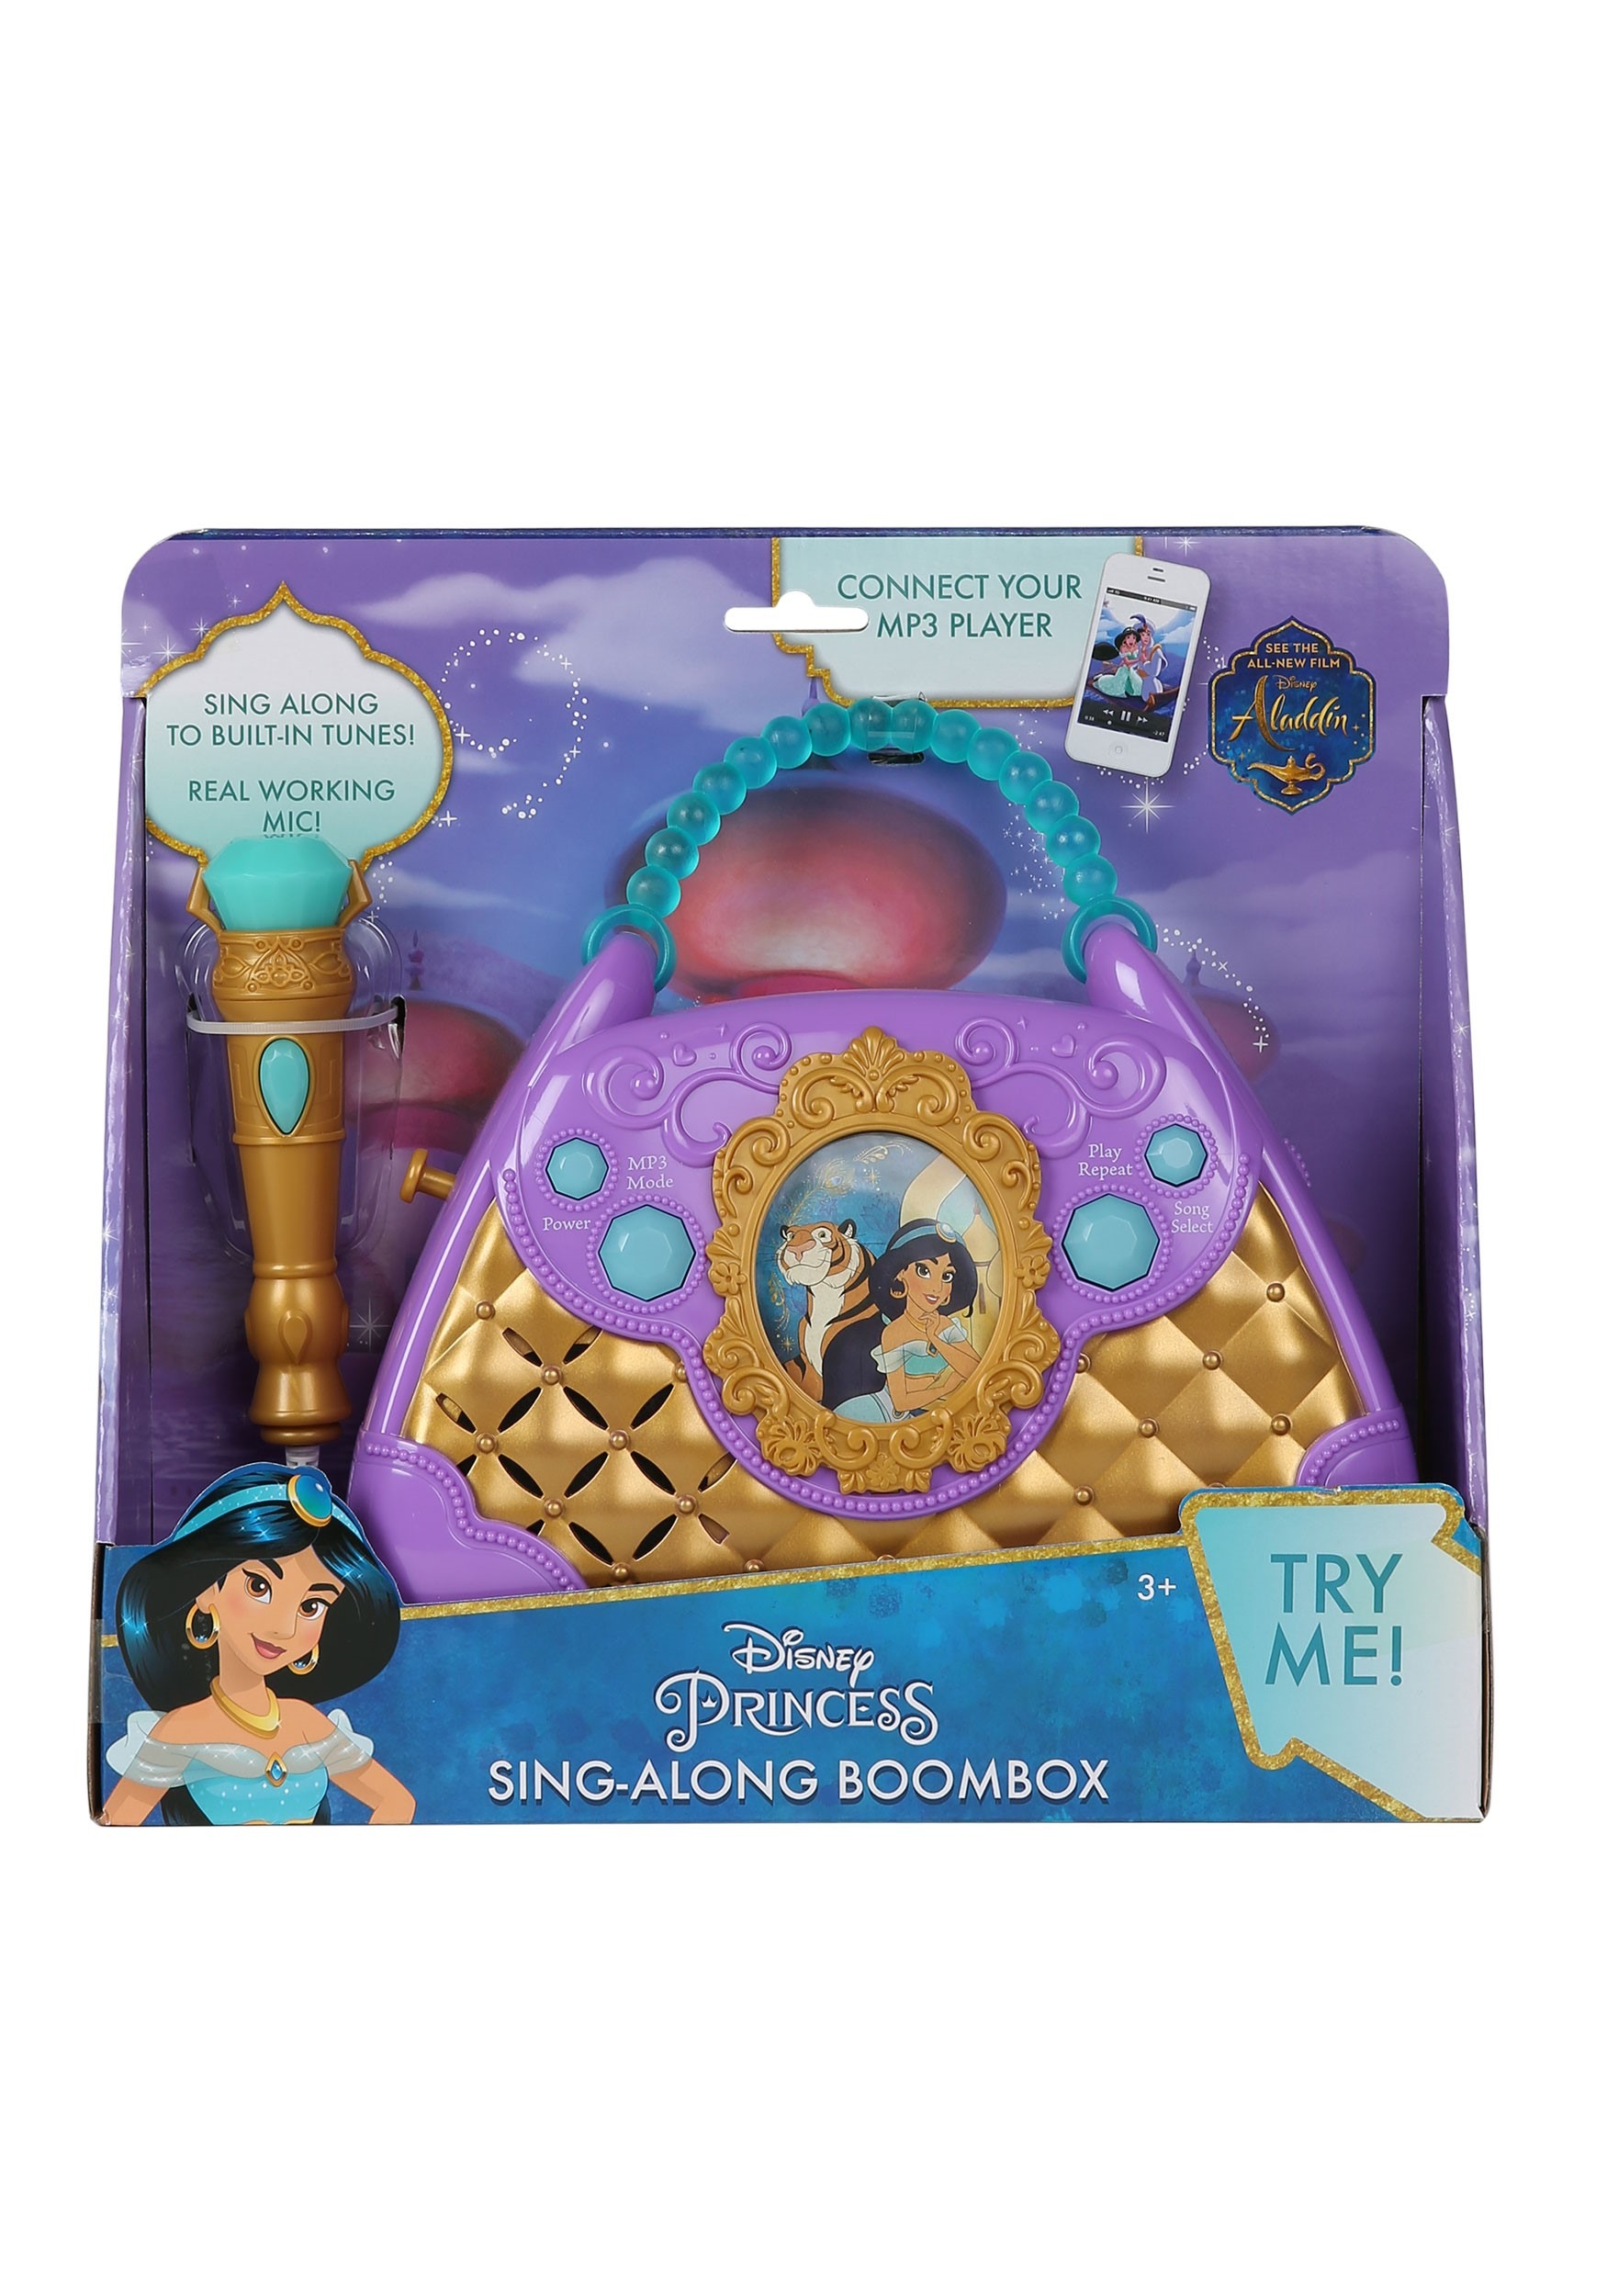 Disney Aladdin Princess Jasmine Sing-along Boombox Connect Your Mp3 Player for sale online 